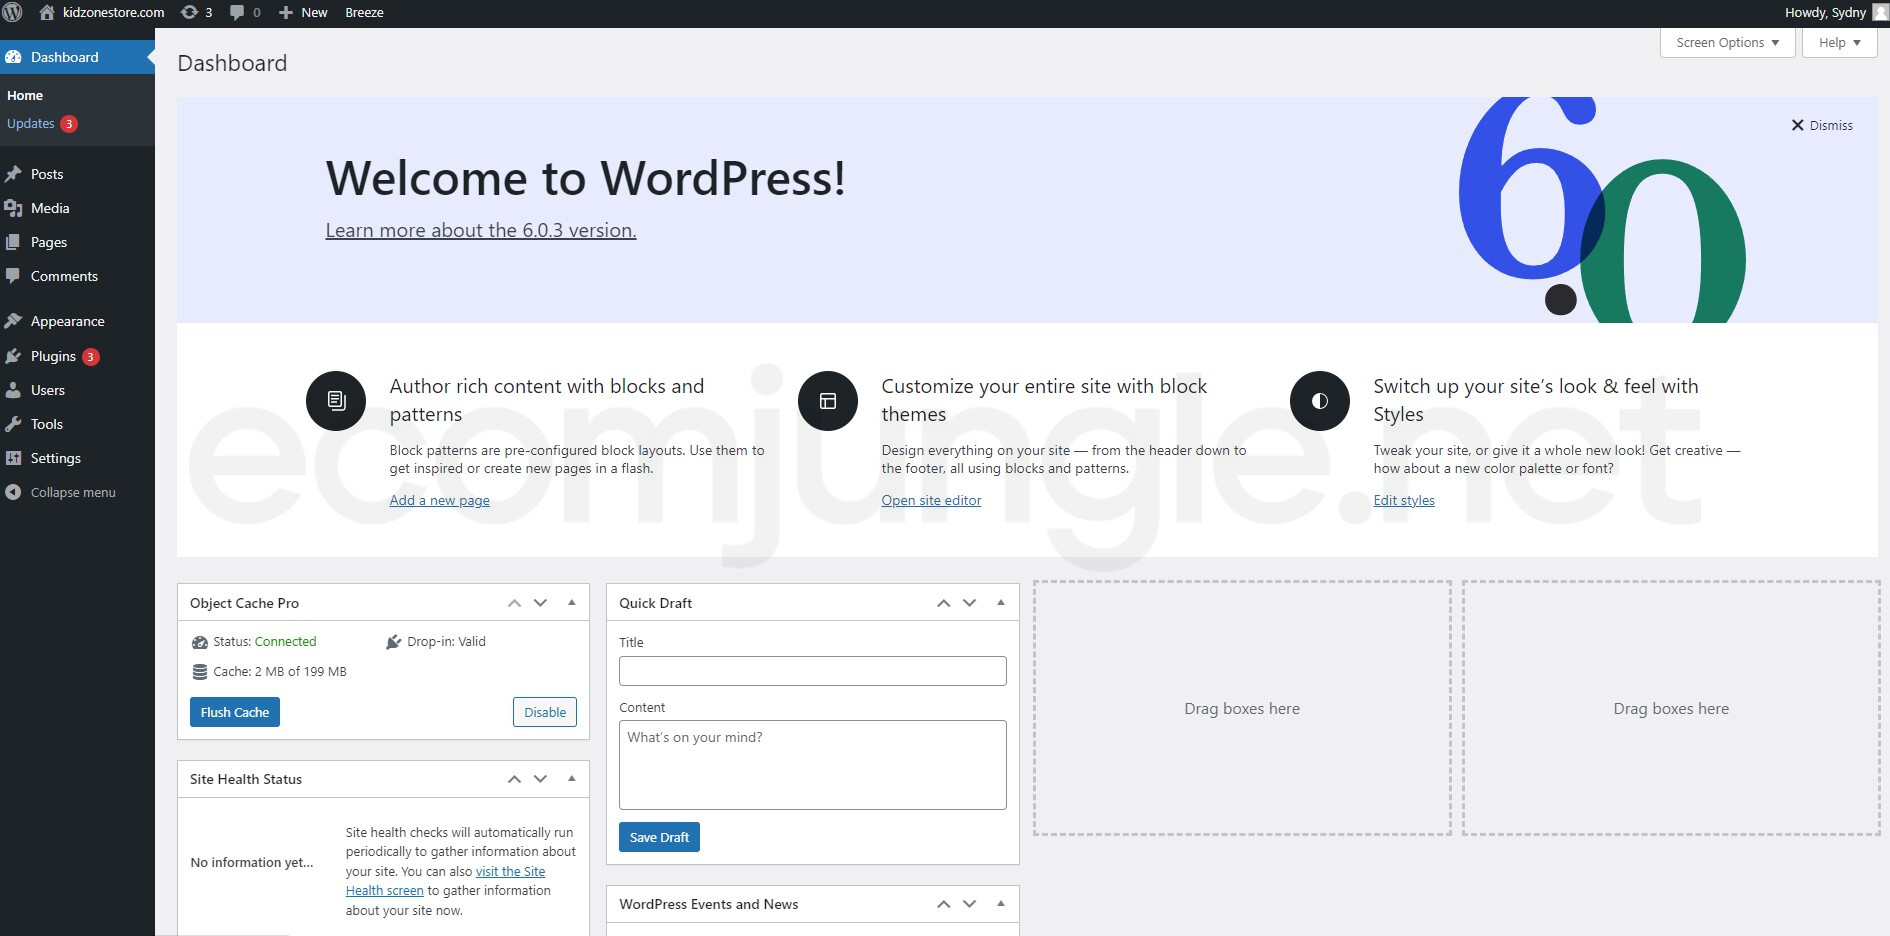 You can create new posts, add new pages, upload media, and approve comments from the WordPress admin dashboard